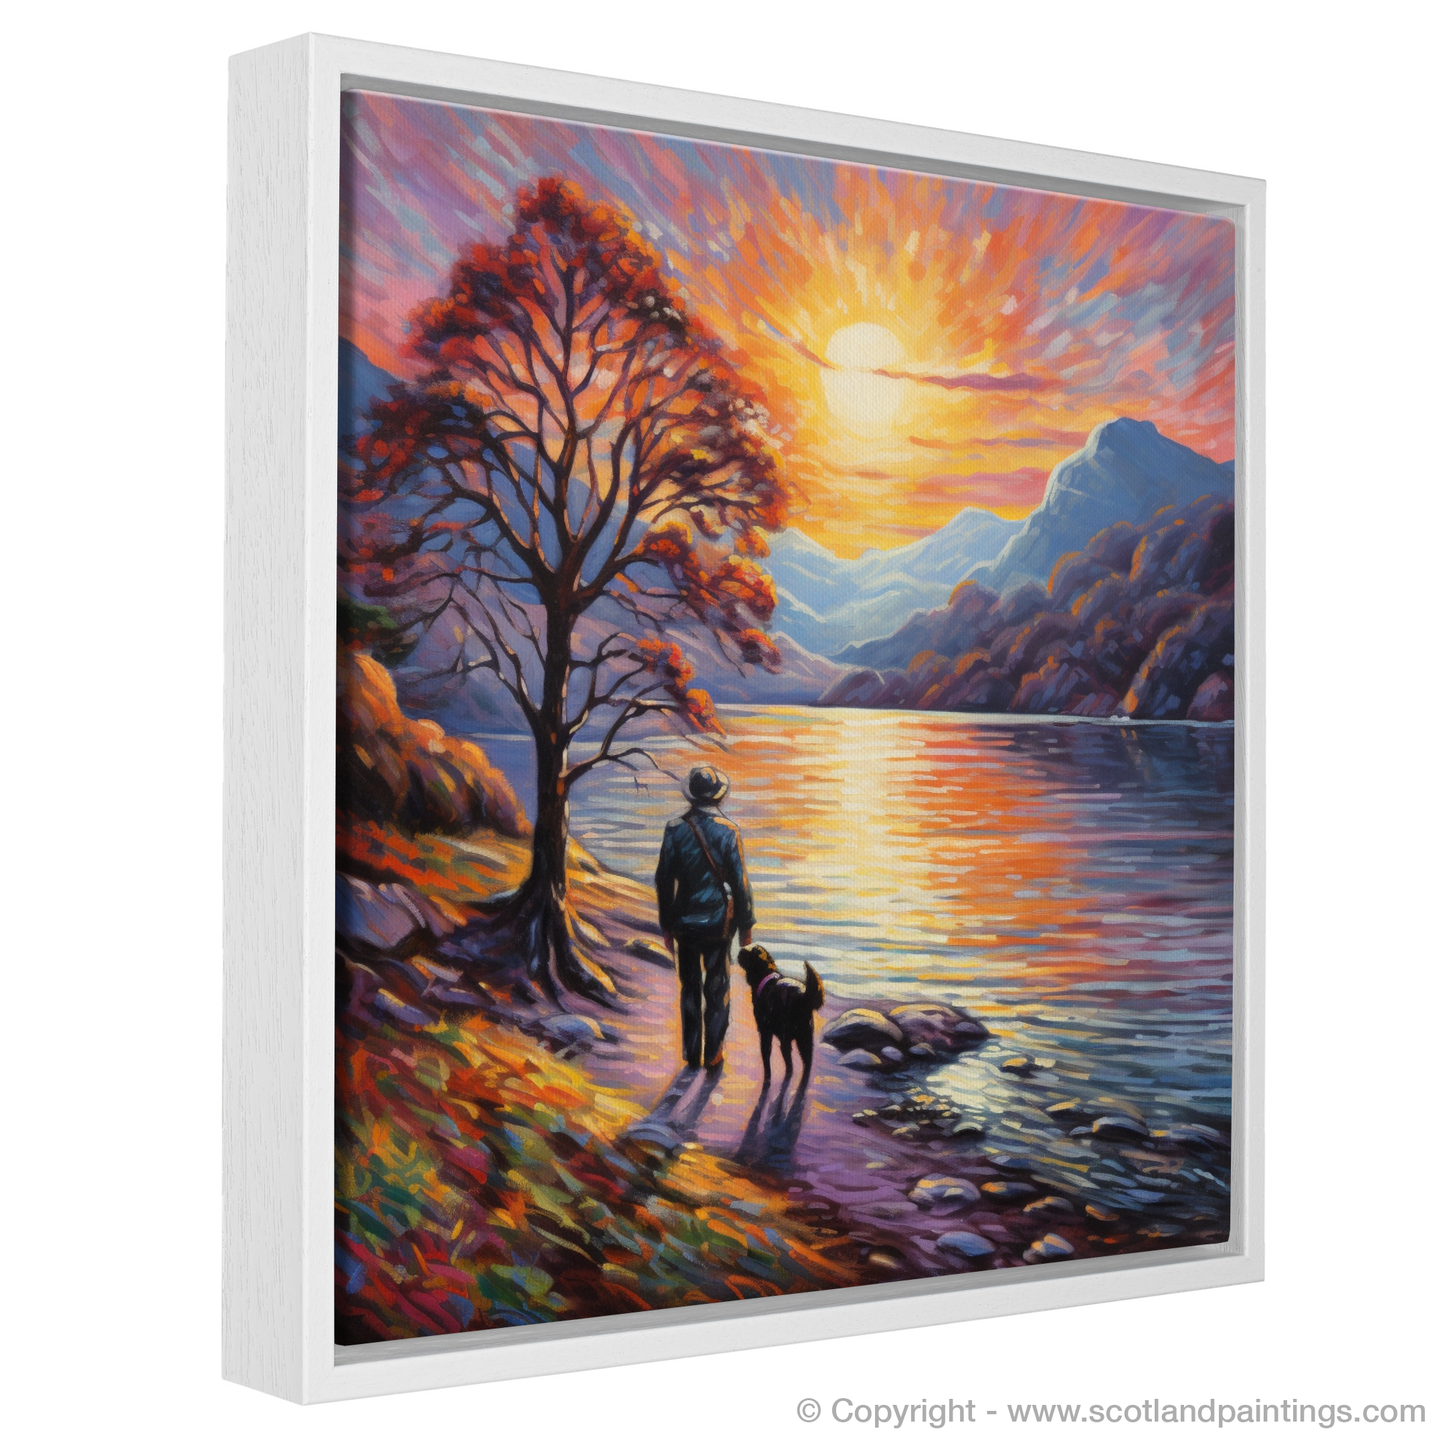 Painting and Art Print of A man walking dog at the side of Loch Lomond entitled "Strolling with Serenity at Sunset on Loch Lomond".